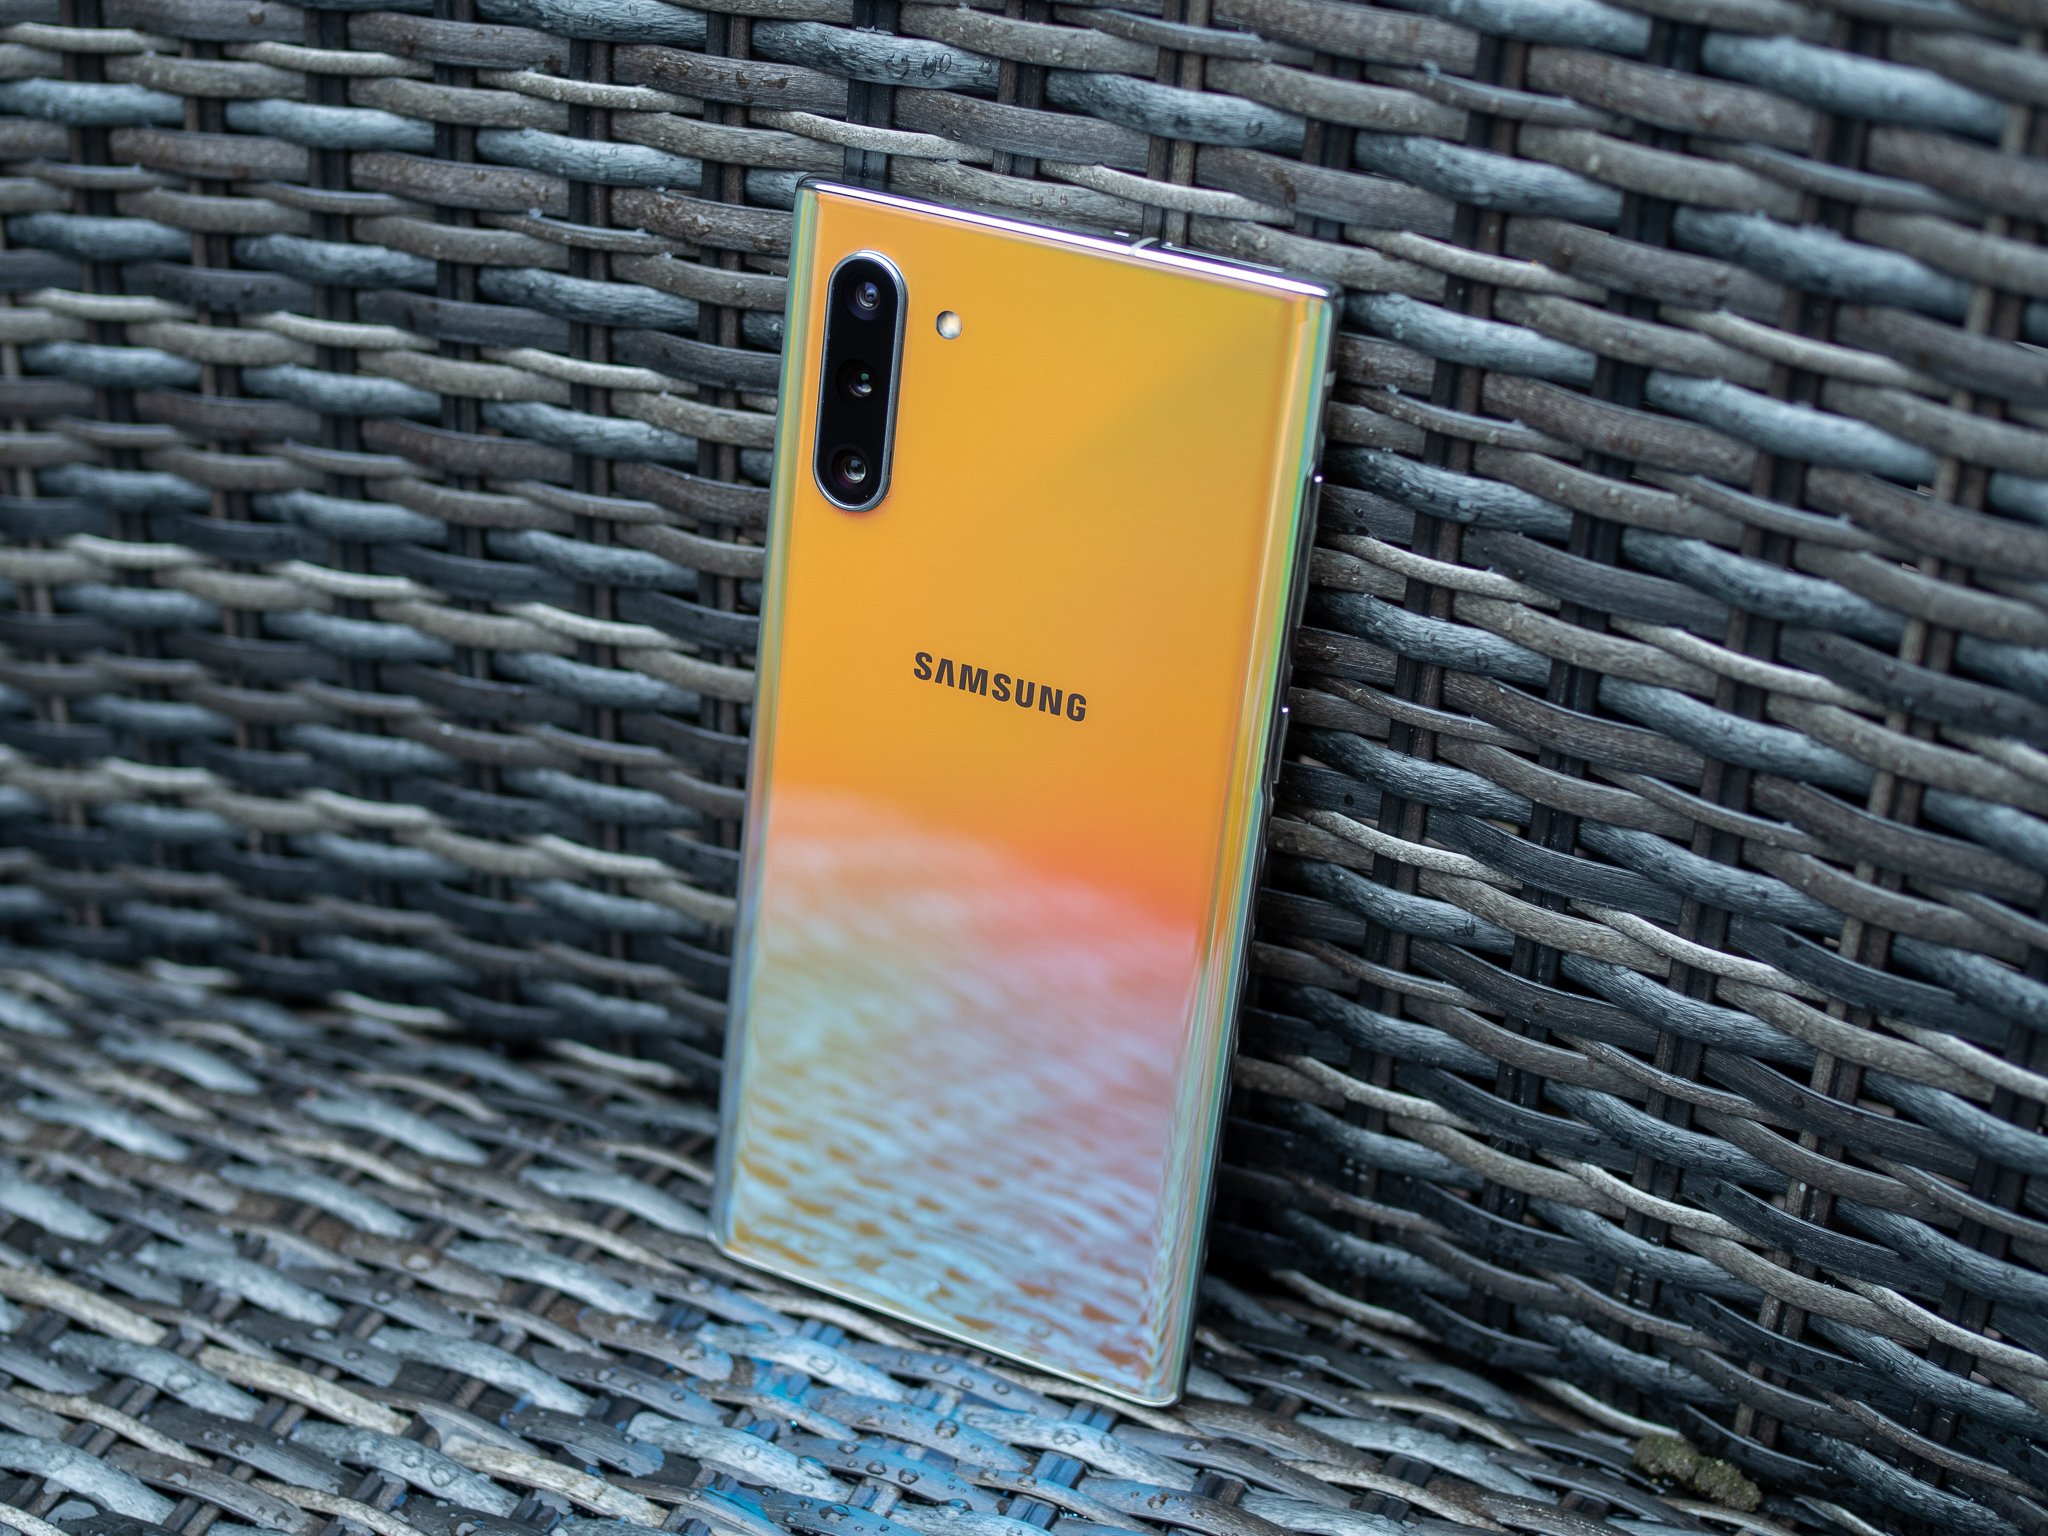 Galaxy Note10 & Note10+ Overall Performance